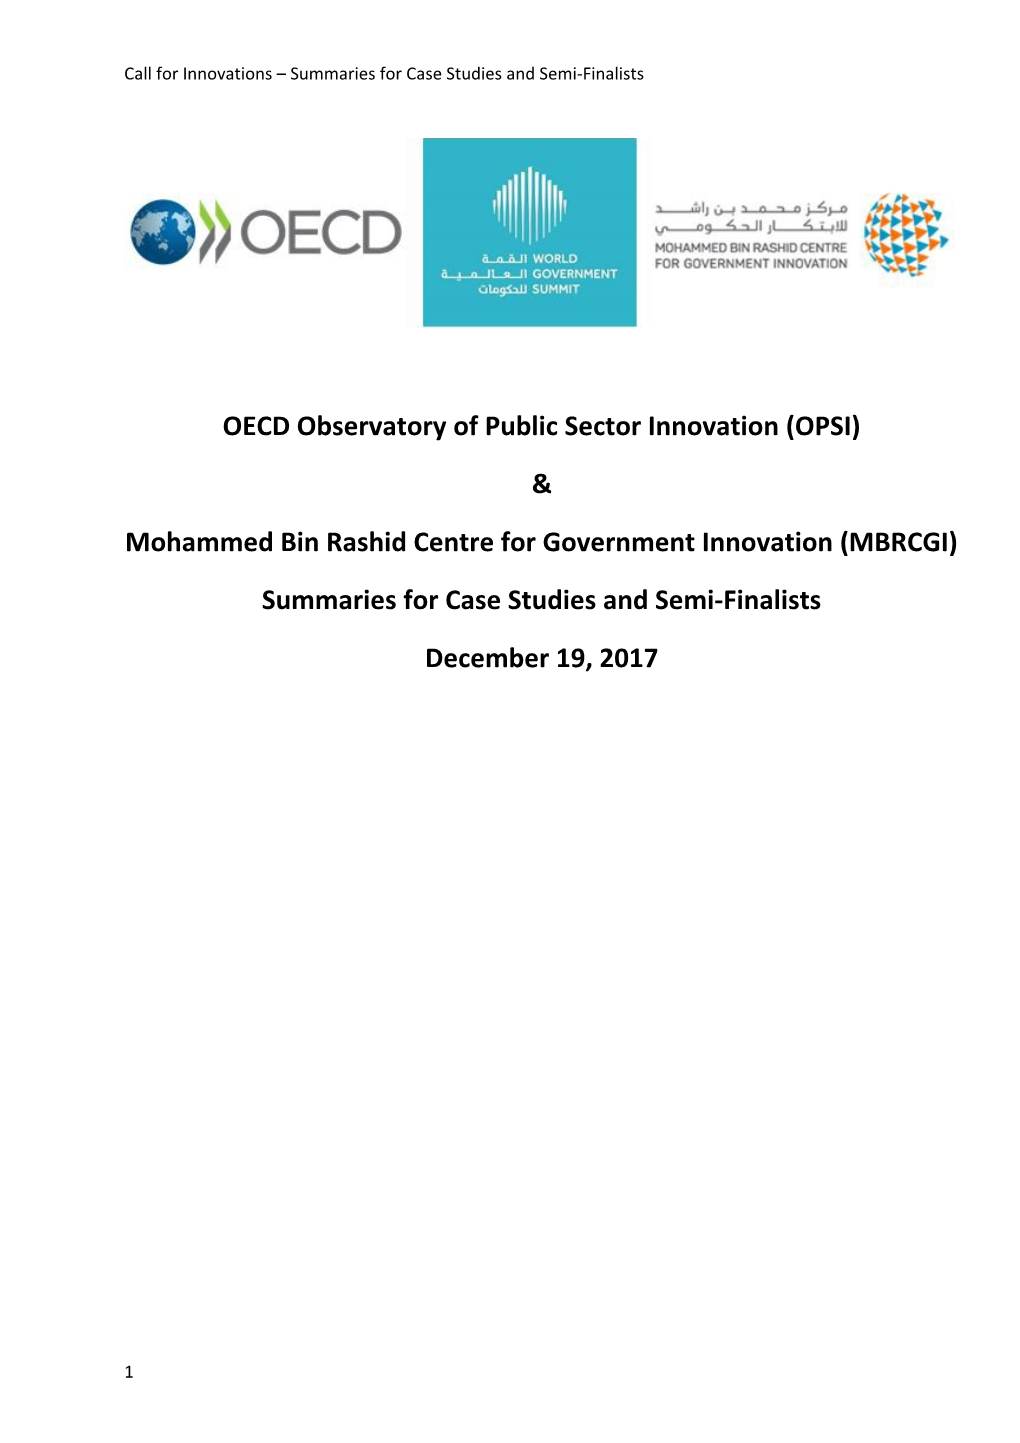 OECD Observatory of Public Sector Innovation (OPSI)